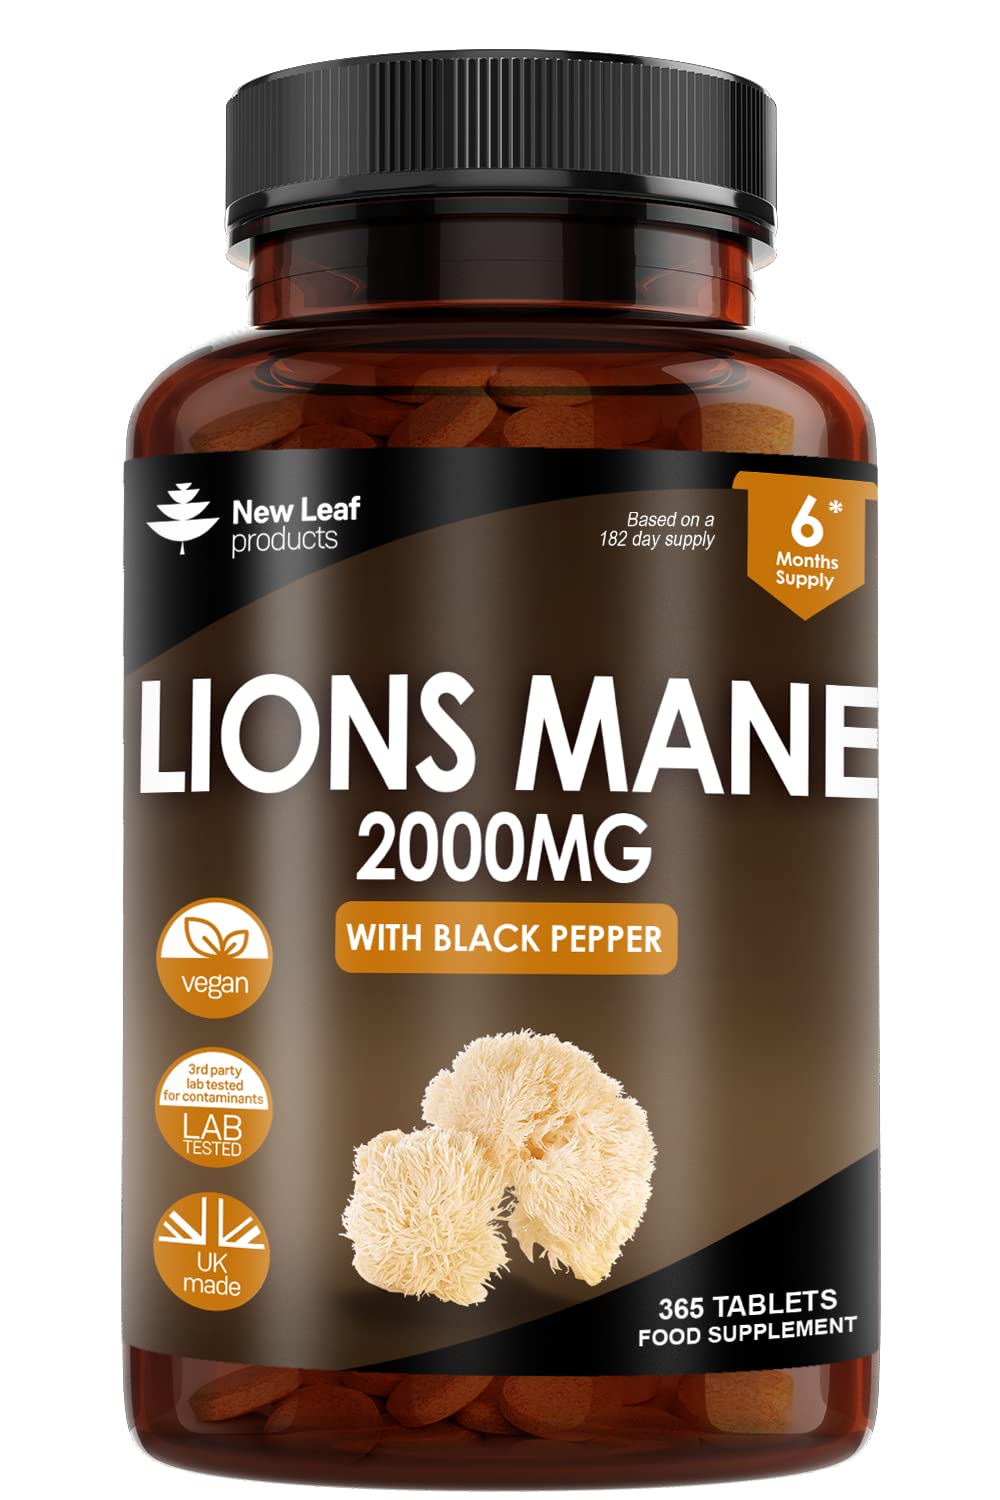 Lions Mane Mushroom Extract Supplement 2000mg - 180 High Strength Vegan Tablets with Black Pepper - (Not Powder or Capsules) Made in The UK by New Leaf Products